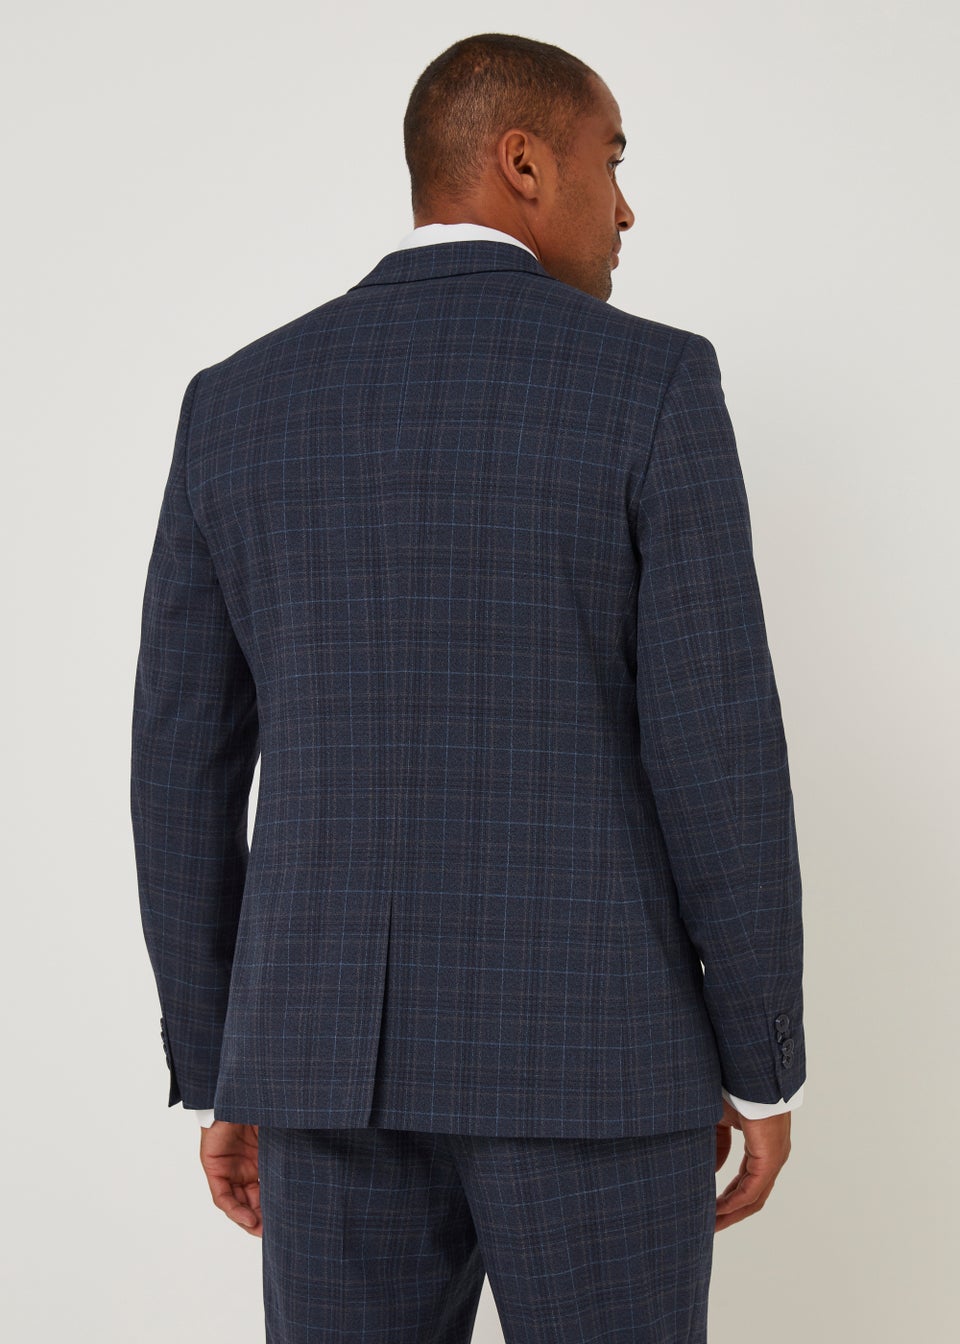 Taylor & Wright Hobbes Navy Check Slim Fit Suit Jacket - Matalan